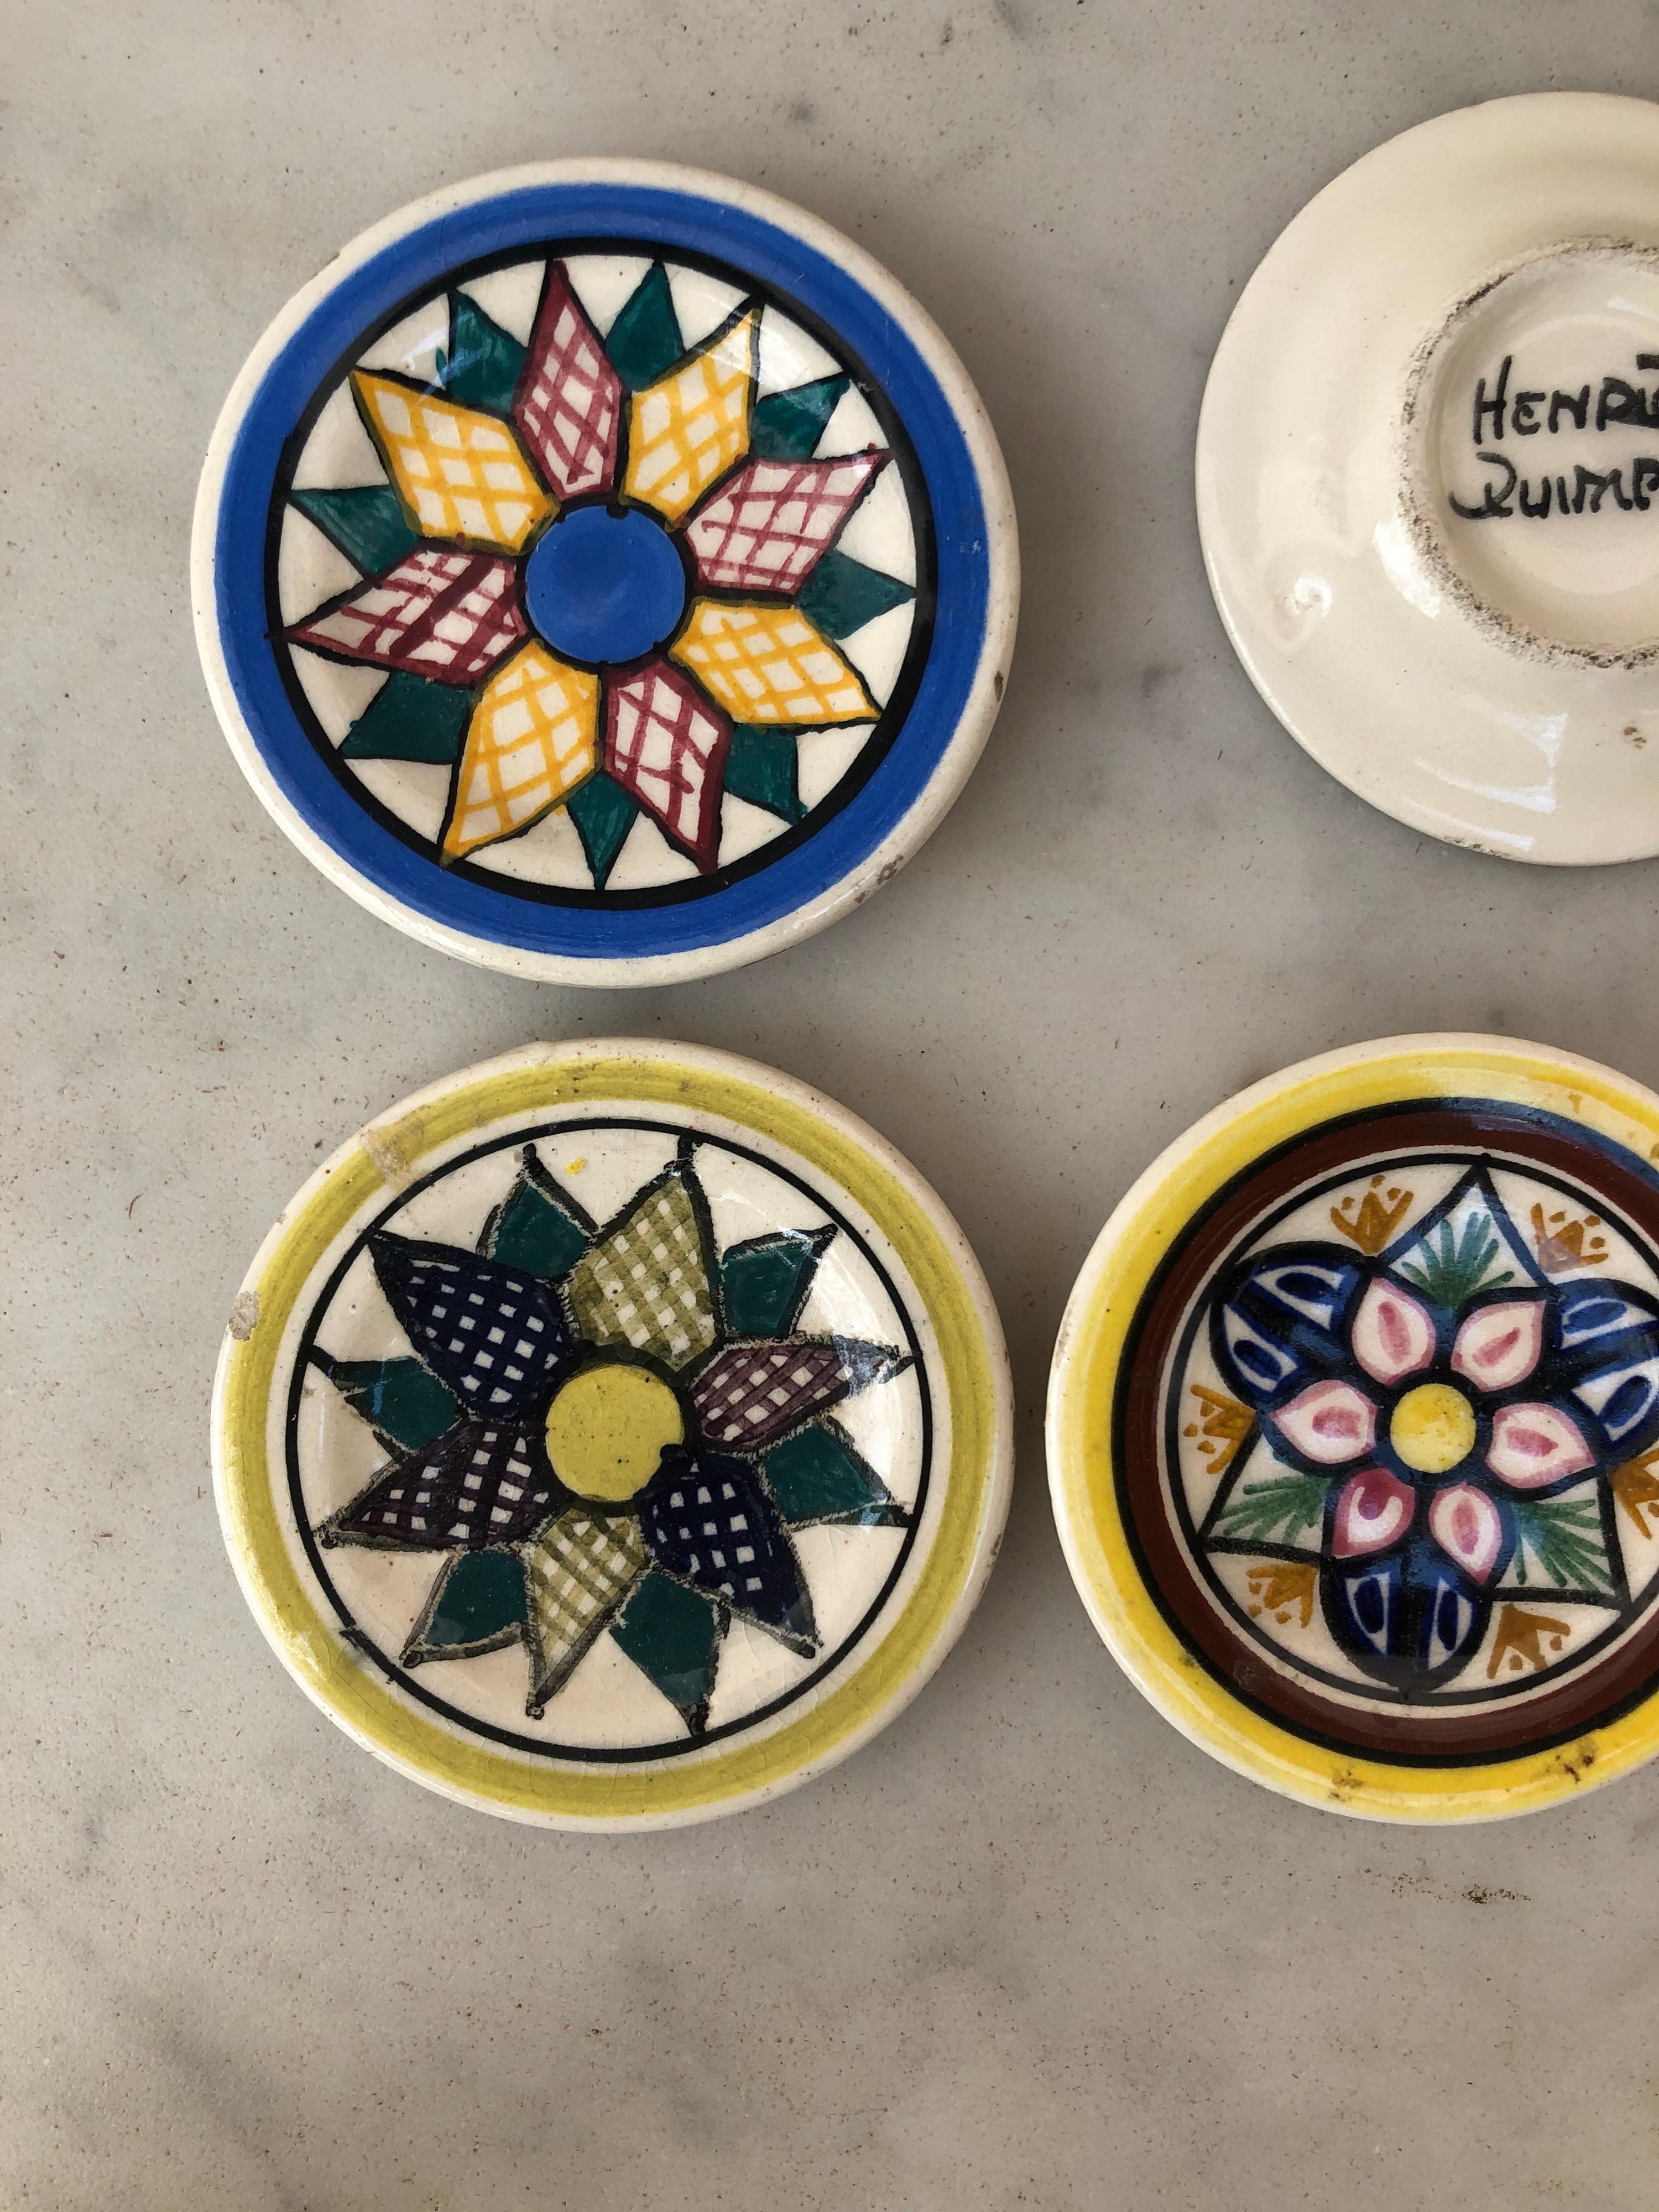 Set of four colorful butter pats Henriot Quimper, circa 1920.
Geometrical pattern all four differents.